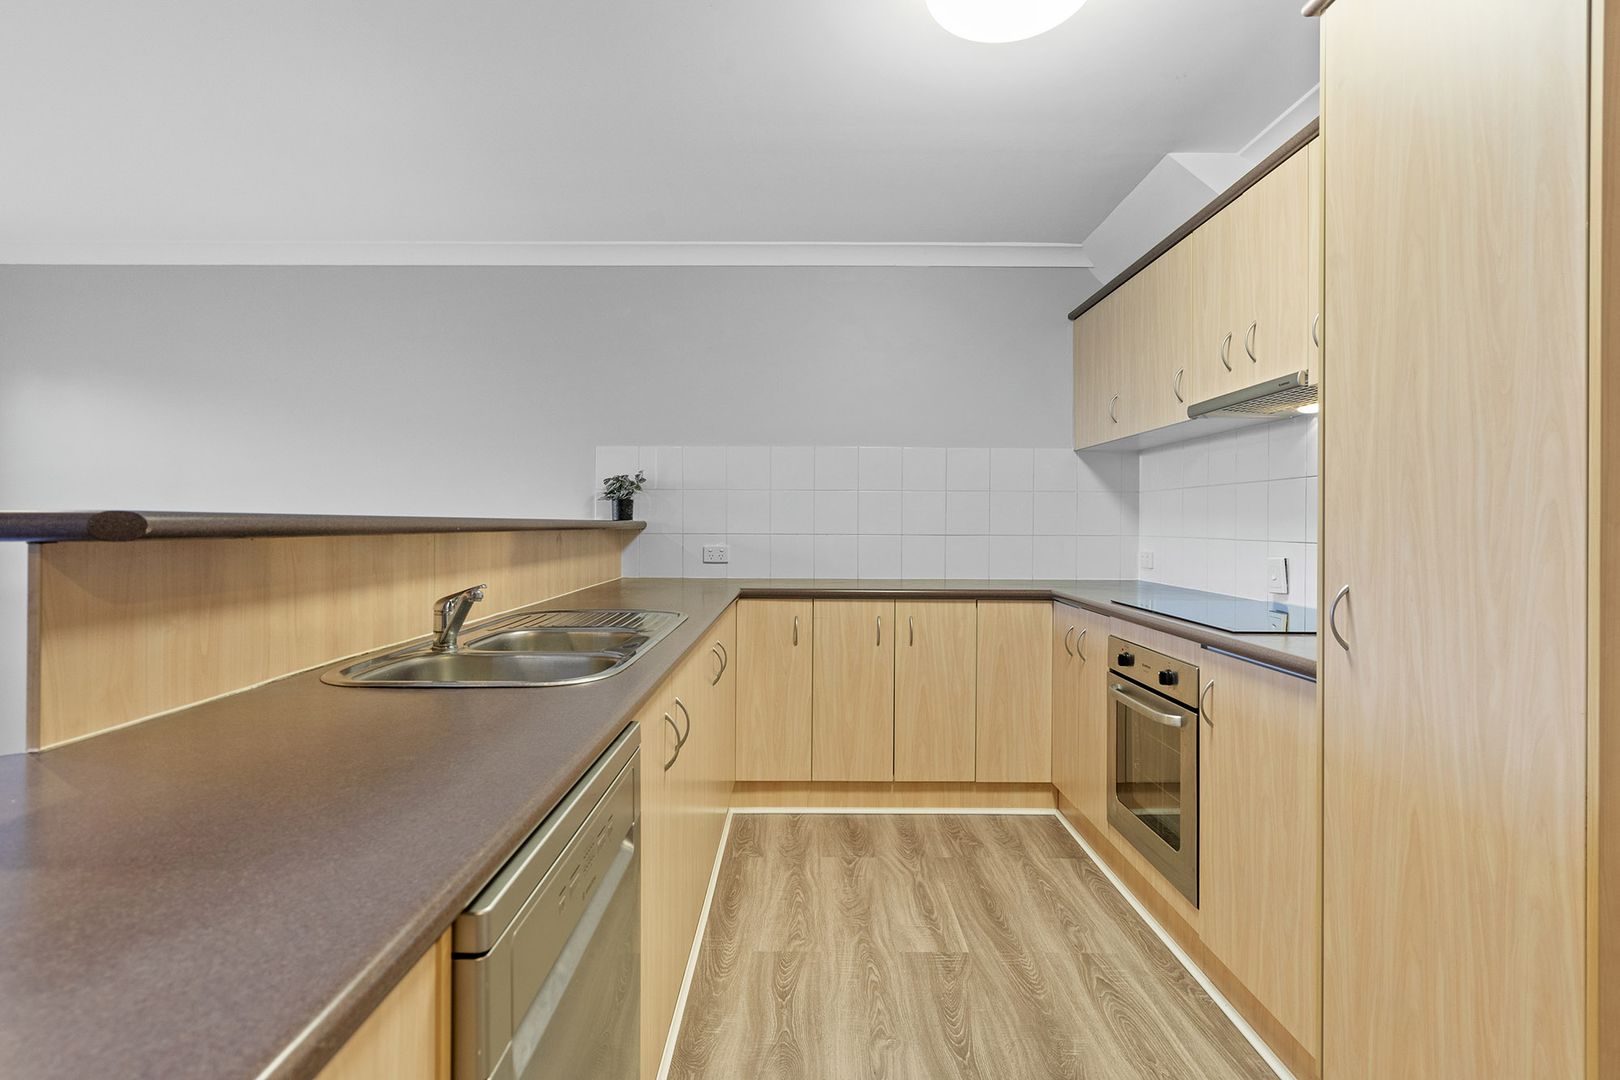 95/13-23 Springfield College Drive, Springfield QLD 4300, Image 2